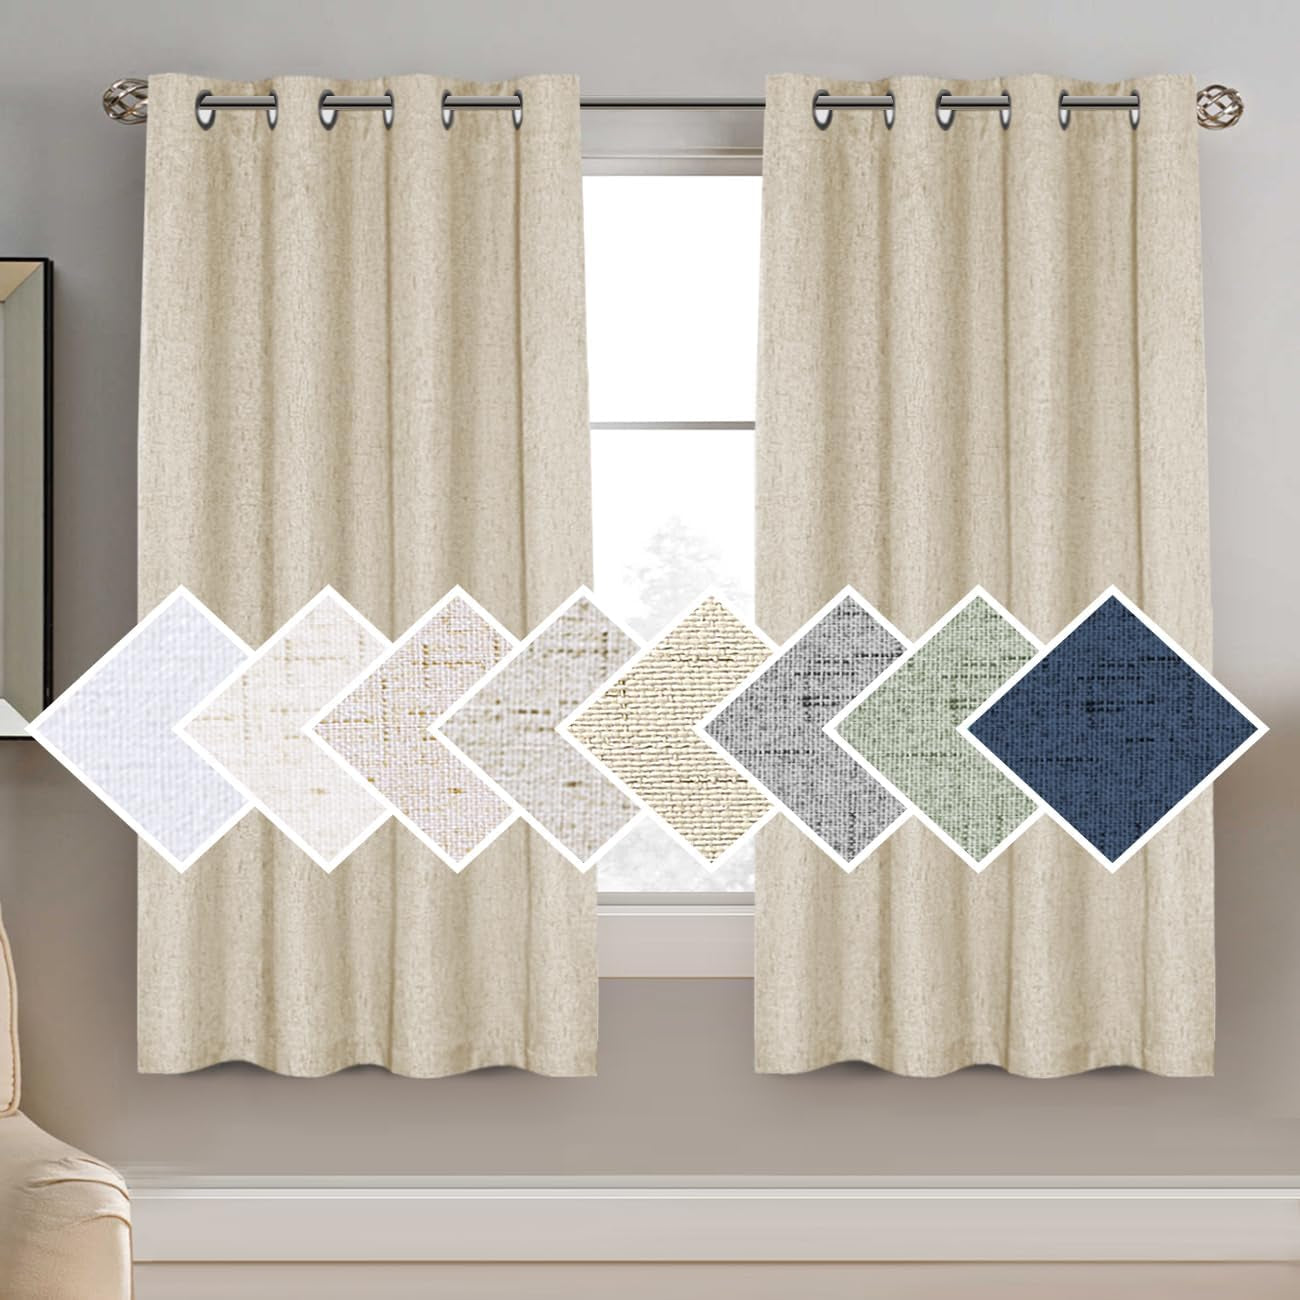 H.VERSAILTEX 100% Blackout Curtains for Bedroom Thermal Insulated Linen Textured Curtains Heat and Full Light Blocking Drapes Living Room Curtains 2 Panel Sets, 52X84 - Inch, Natural  H.VERSAILTEX Bleached Sand 1 Panel - 52"W X 63"L 